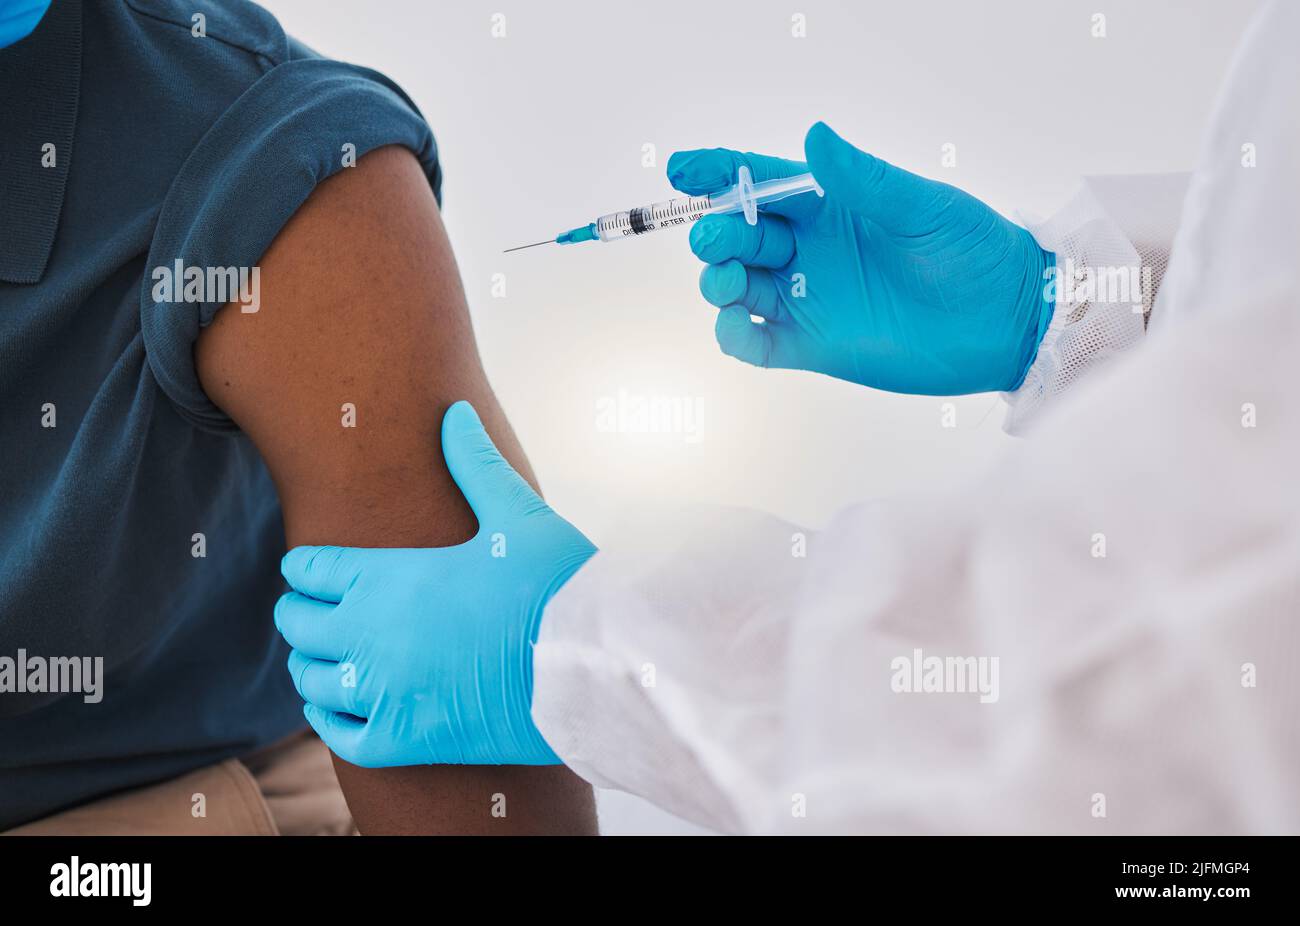 Hands of a doctor ready to inject a patient with the covid vaccine. Healthcare professional injecting a patient with corona virus cure cropped Stock Photo